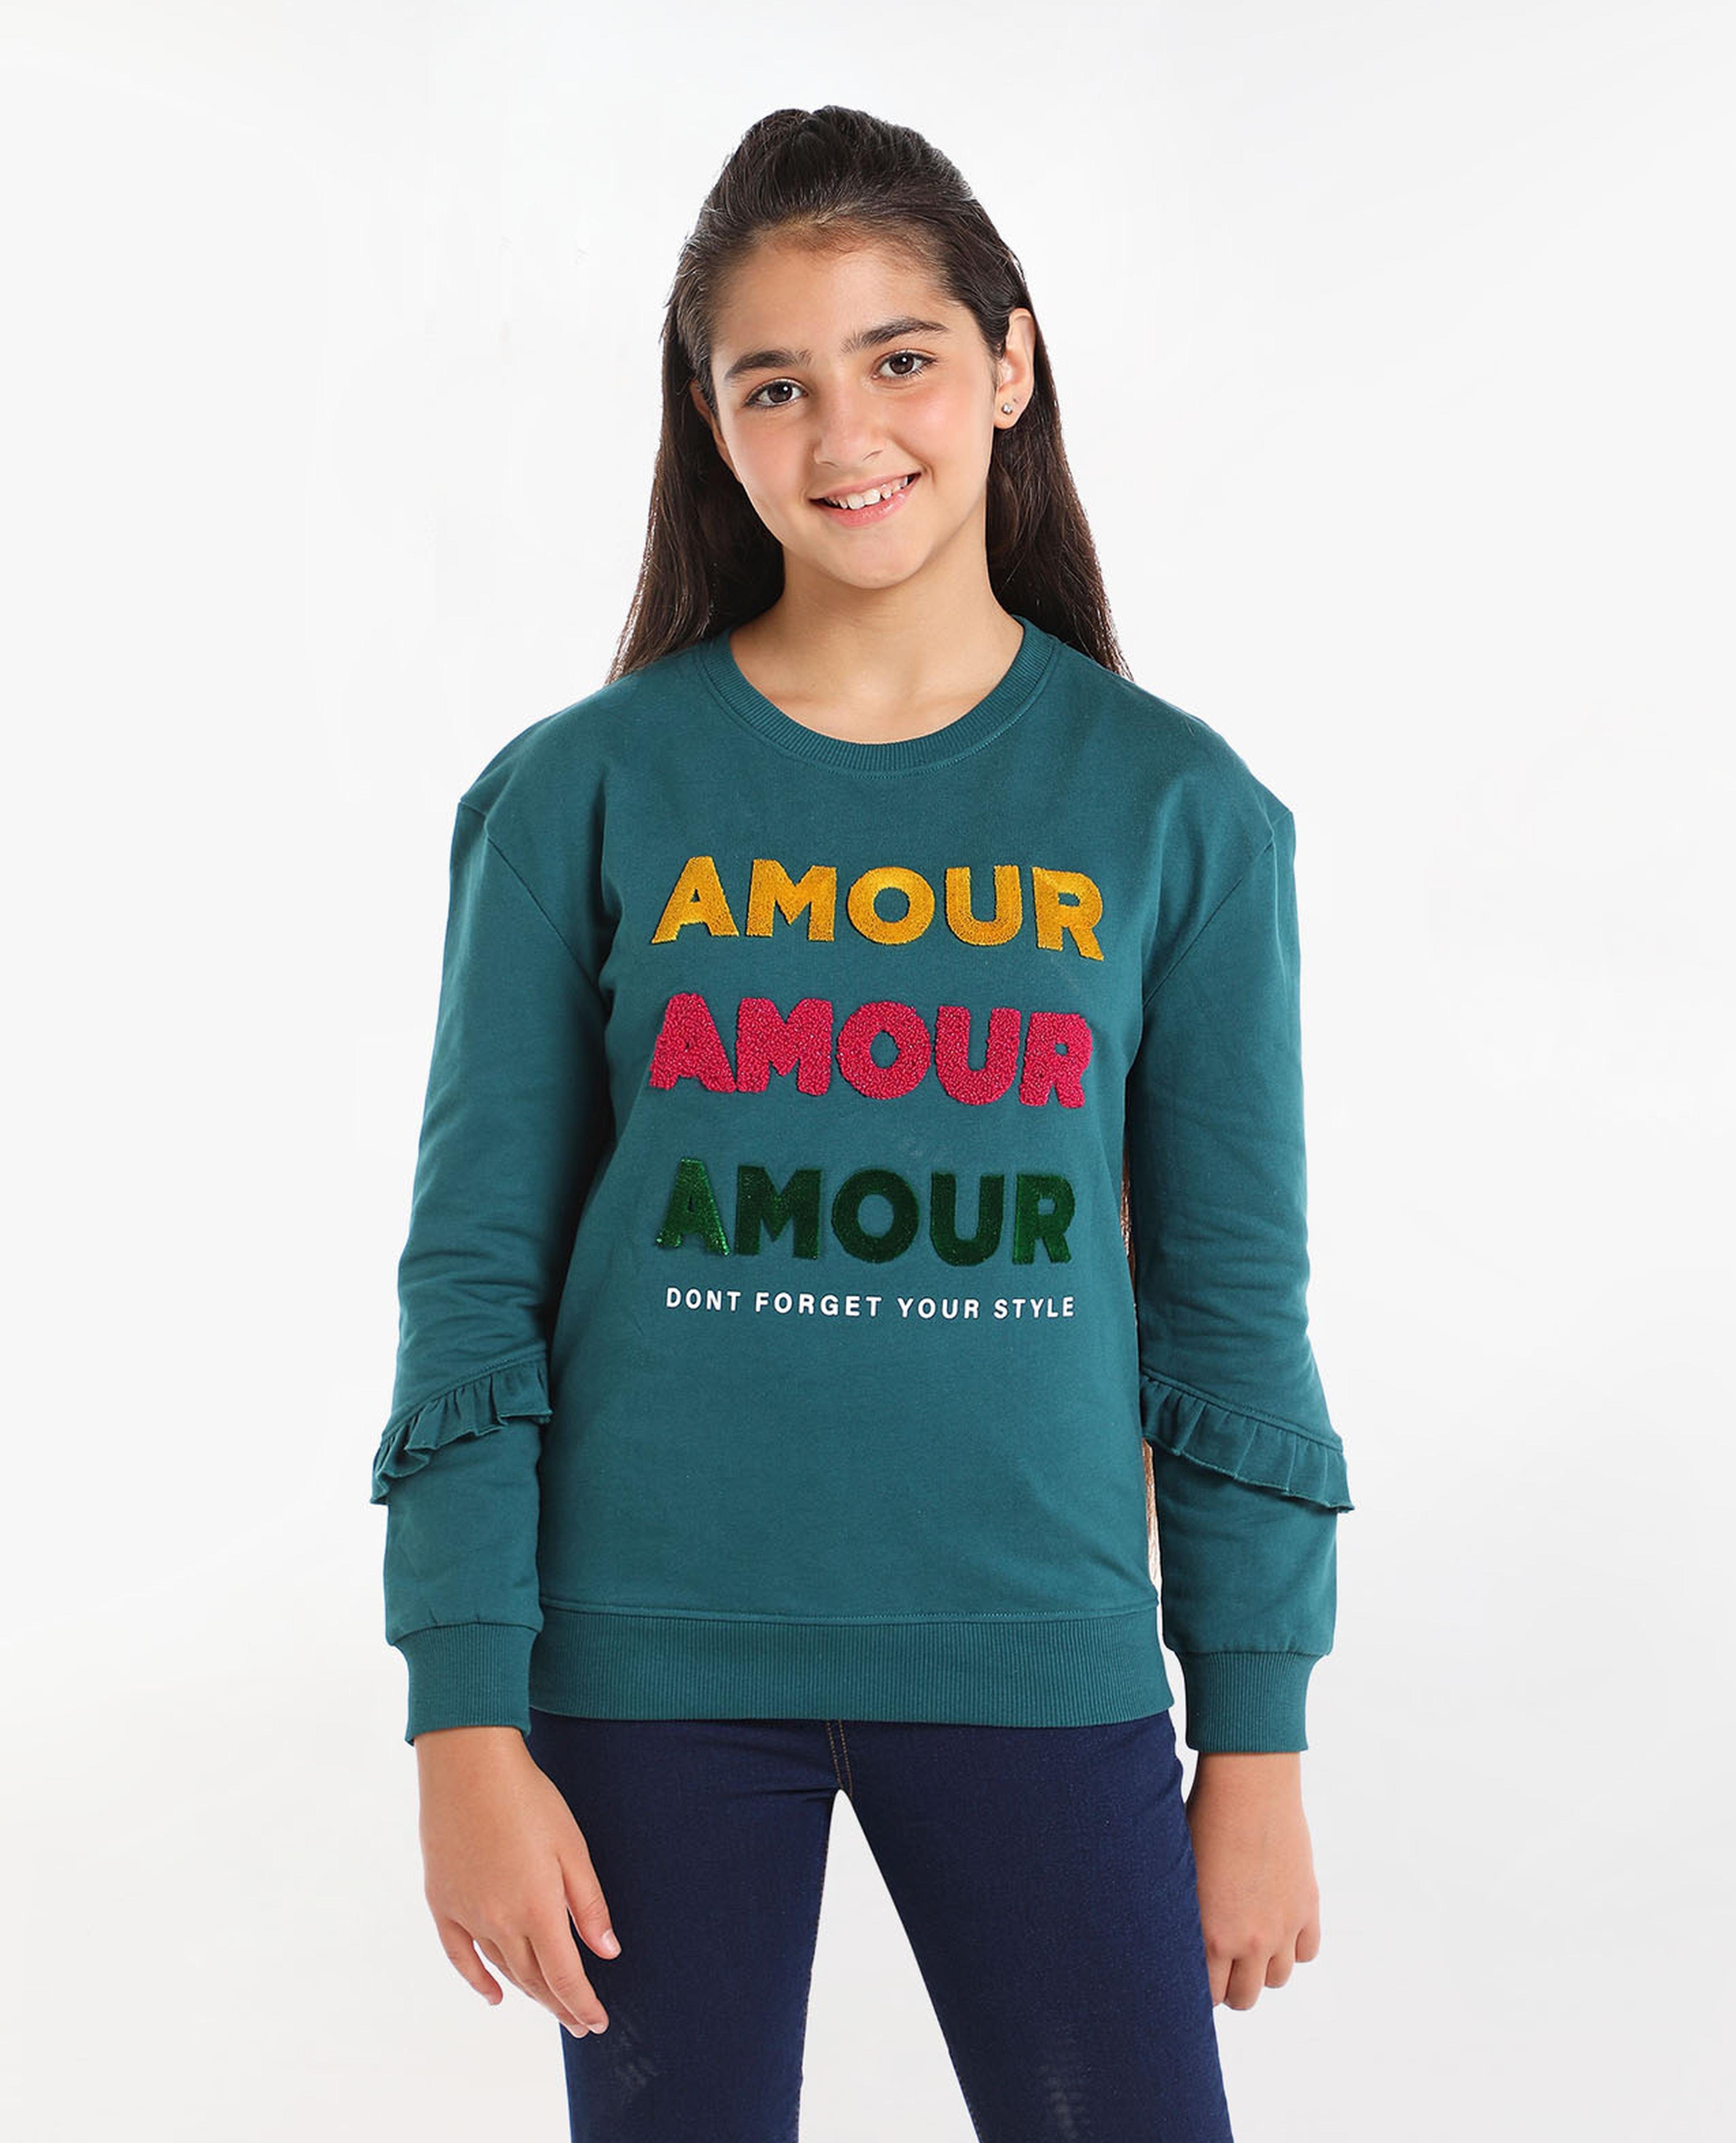 Applique Detailed Sweatshirt with Crew Neck and Long Sleeves